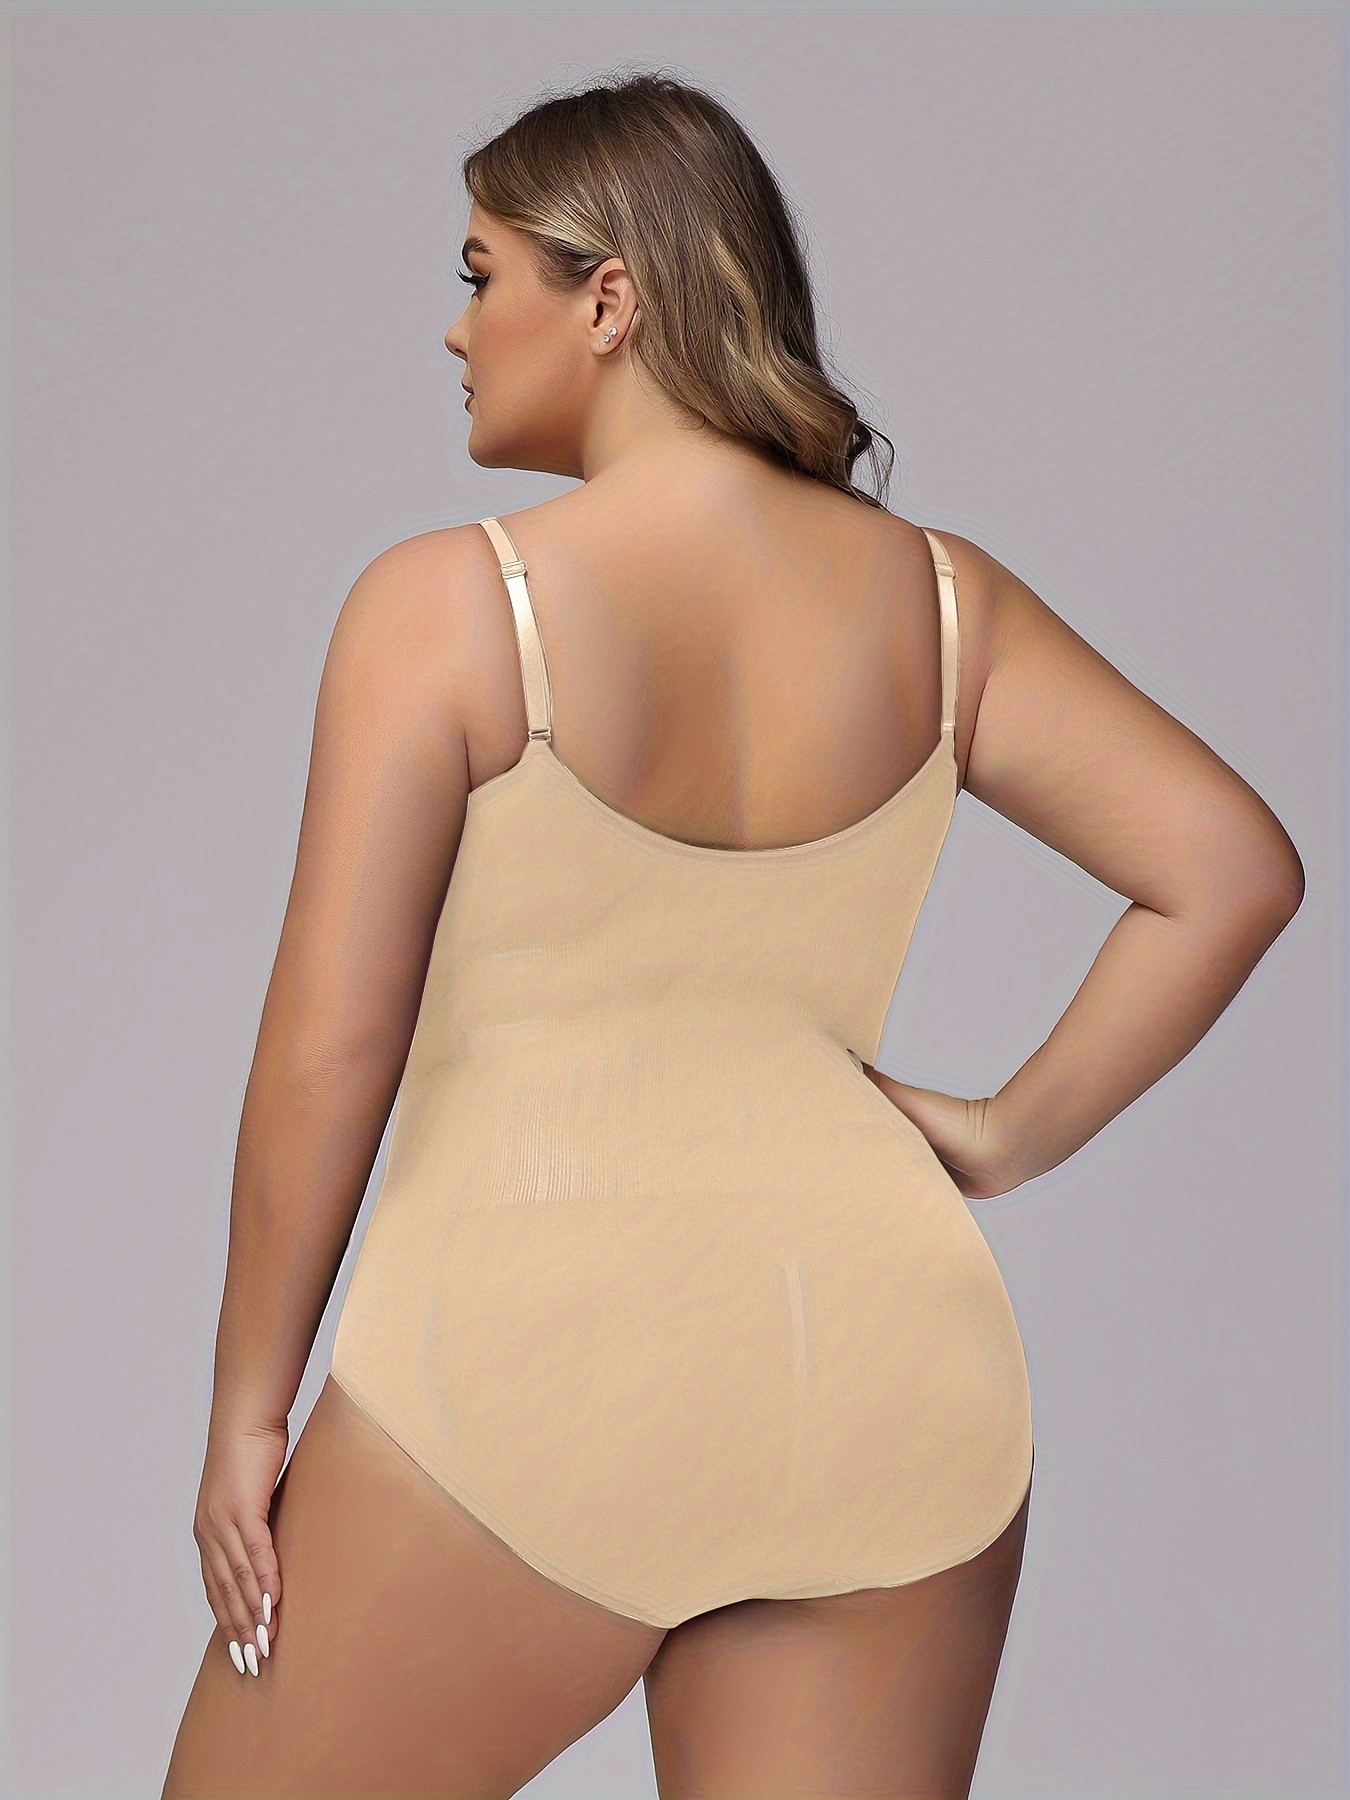 Women's Simple Shapewear Bodysuit, Plus Size Solid Seamless Tummy Control  Slimming Cami Body Shaper, Check Out Today's Deals Now